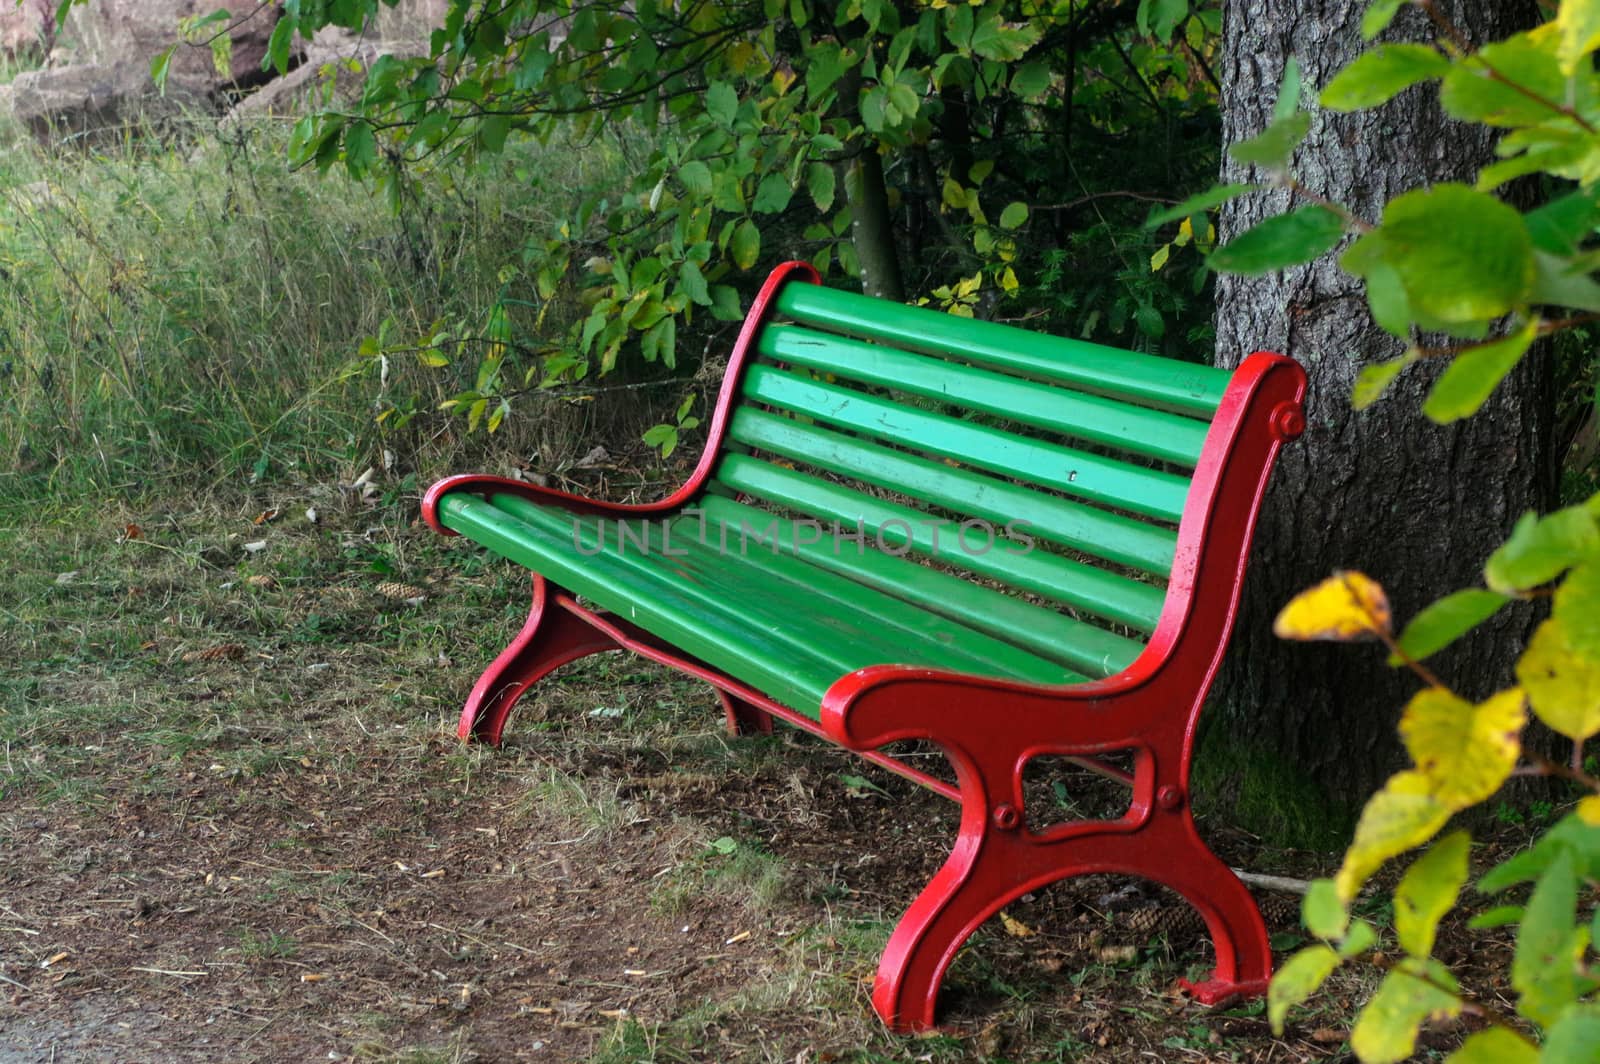 Wooden park bench under trees in the forest by evolutionnow